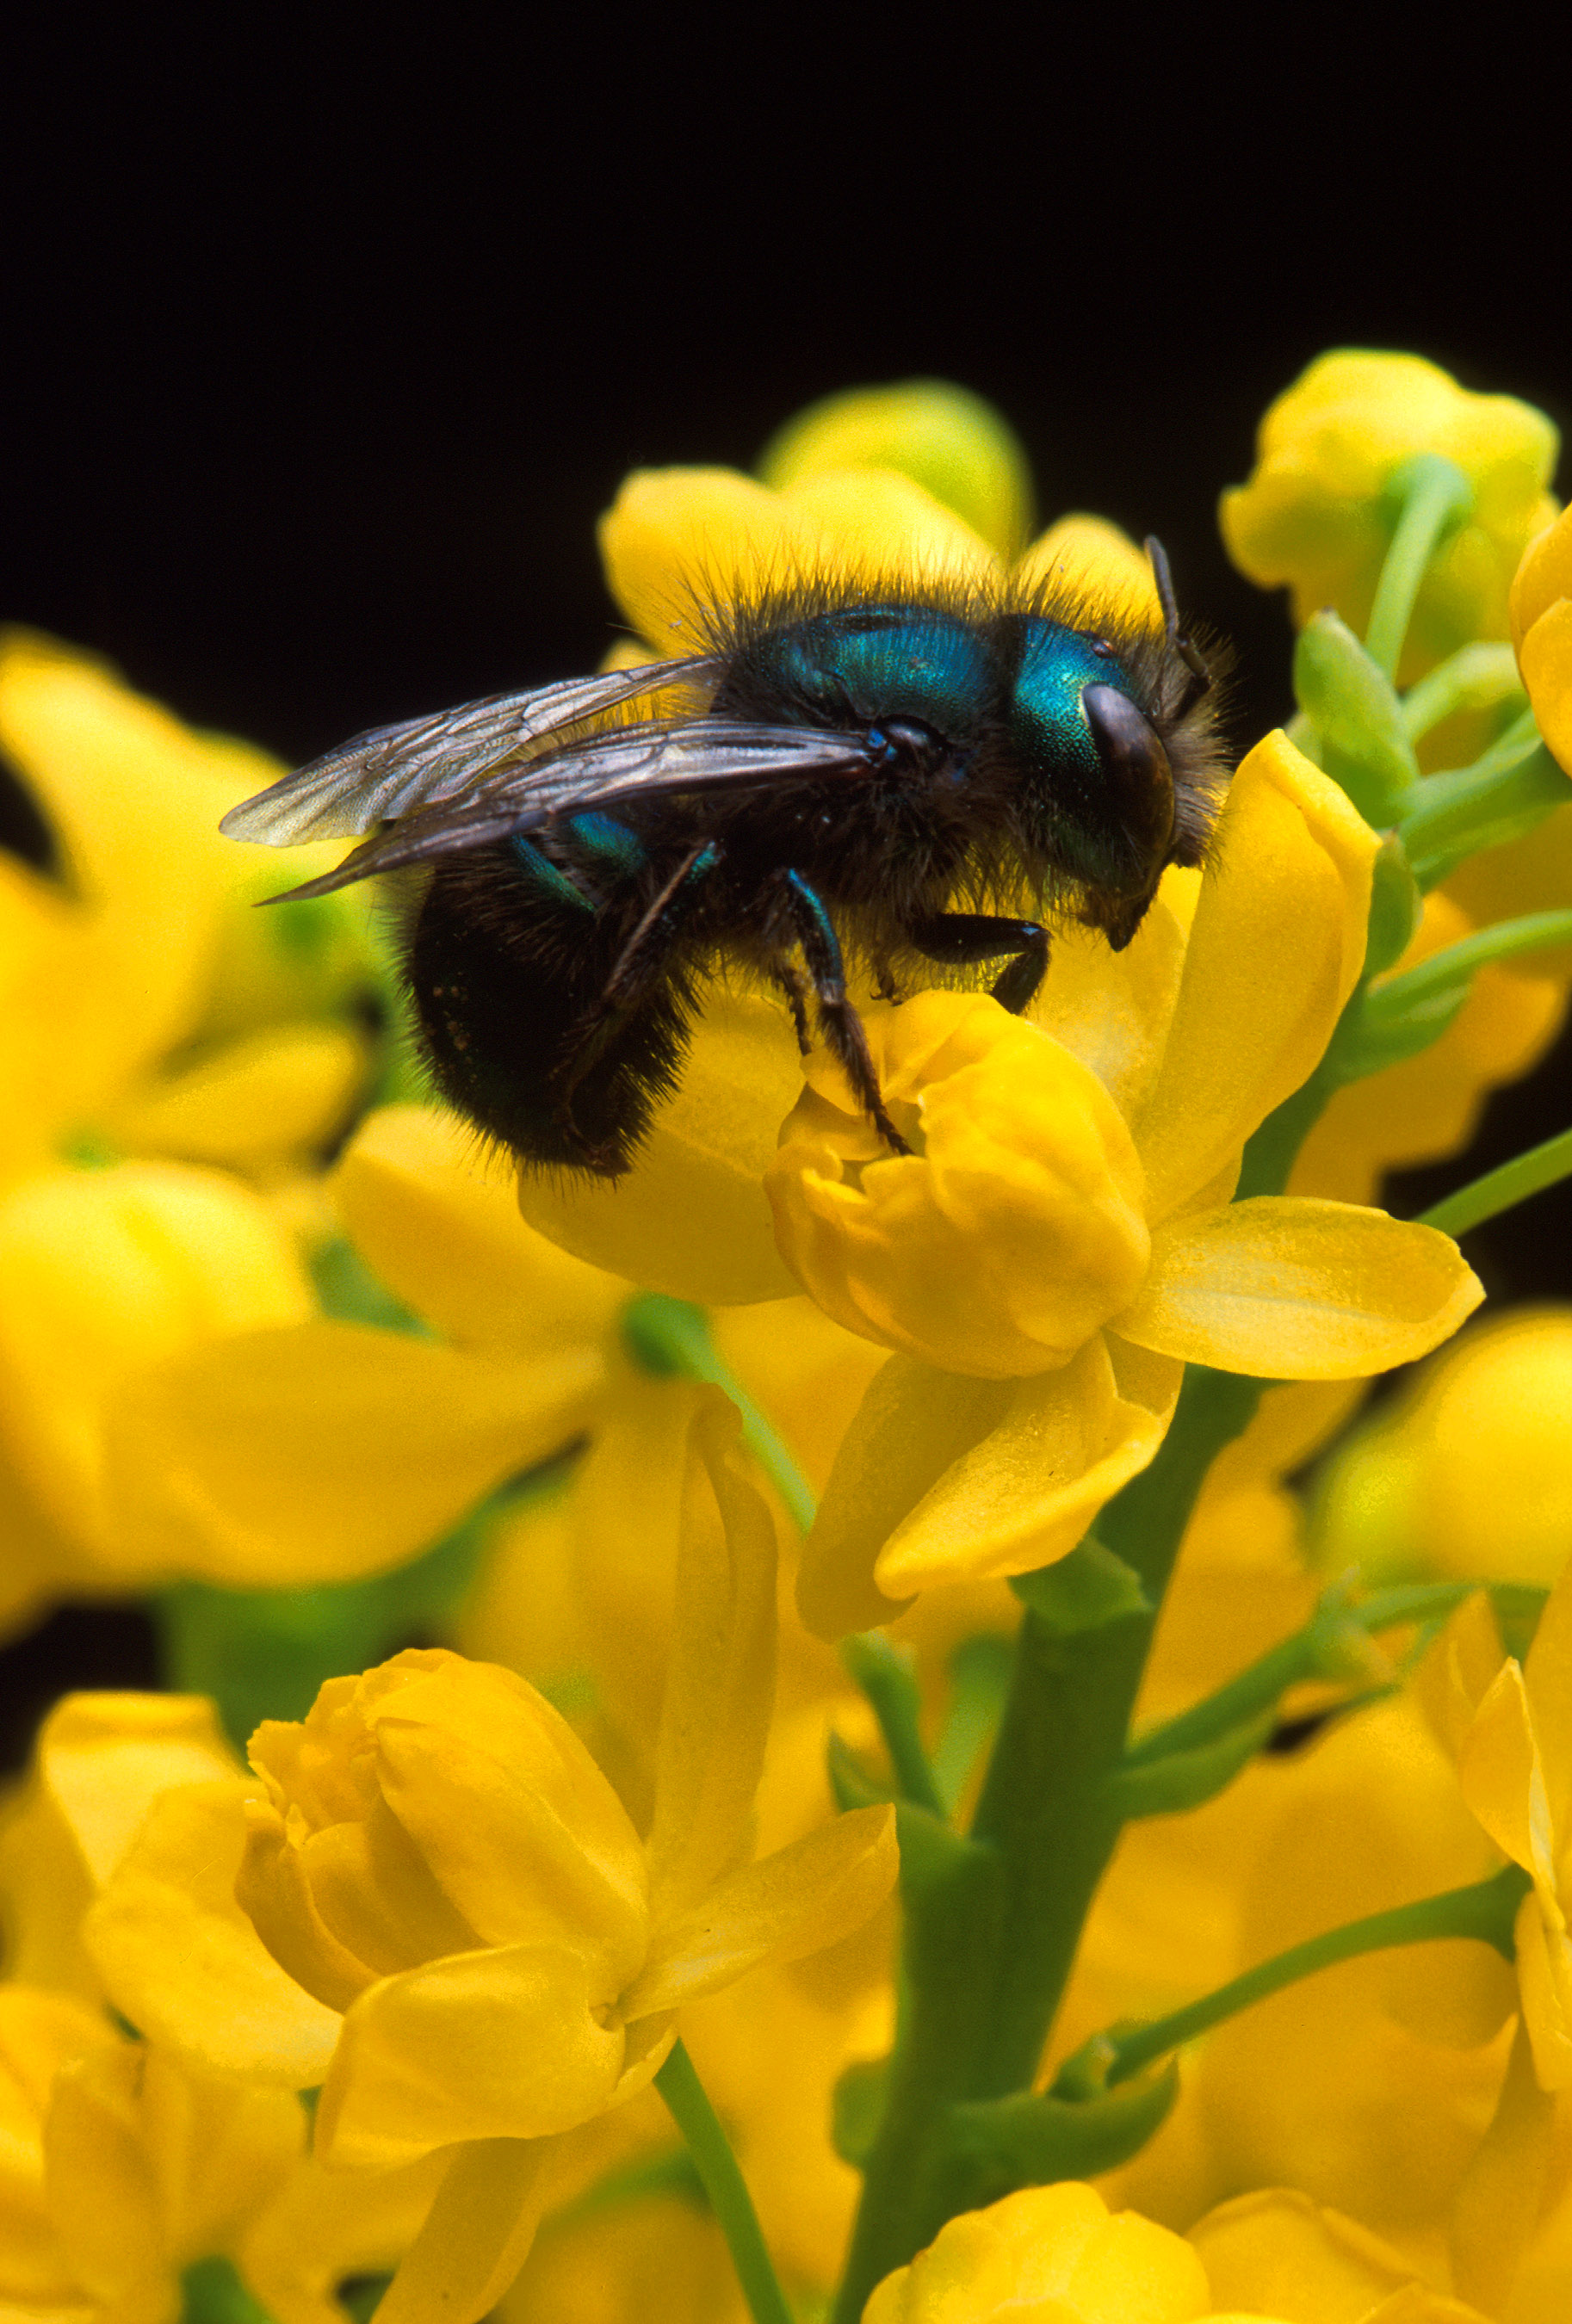 A blueberry bee, Osmia ribifloris, a blue-colored bee native to North America.